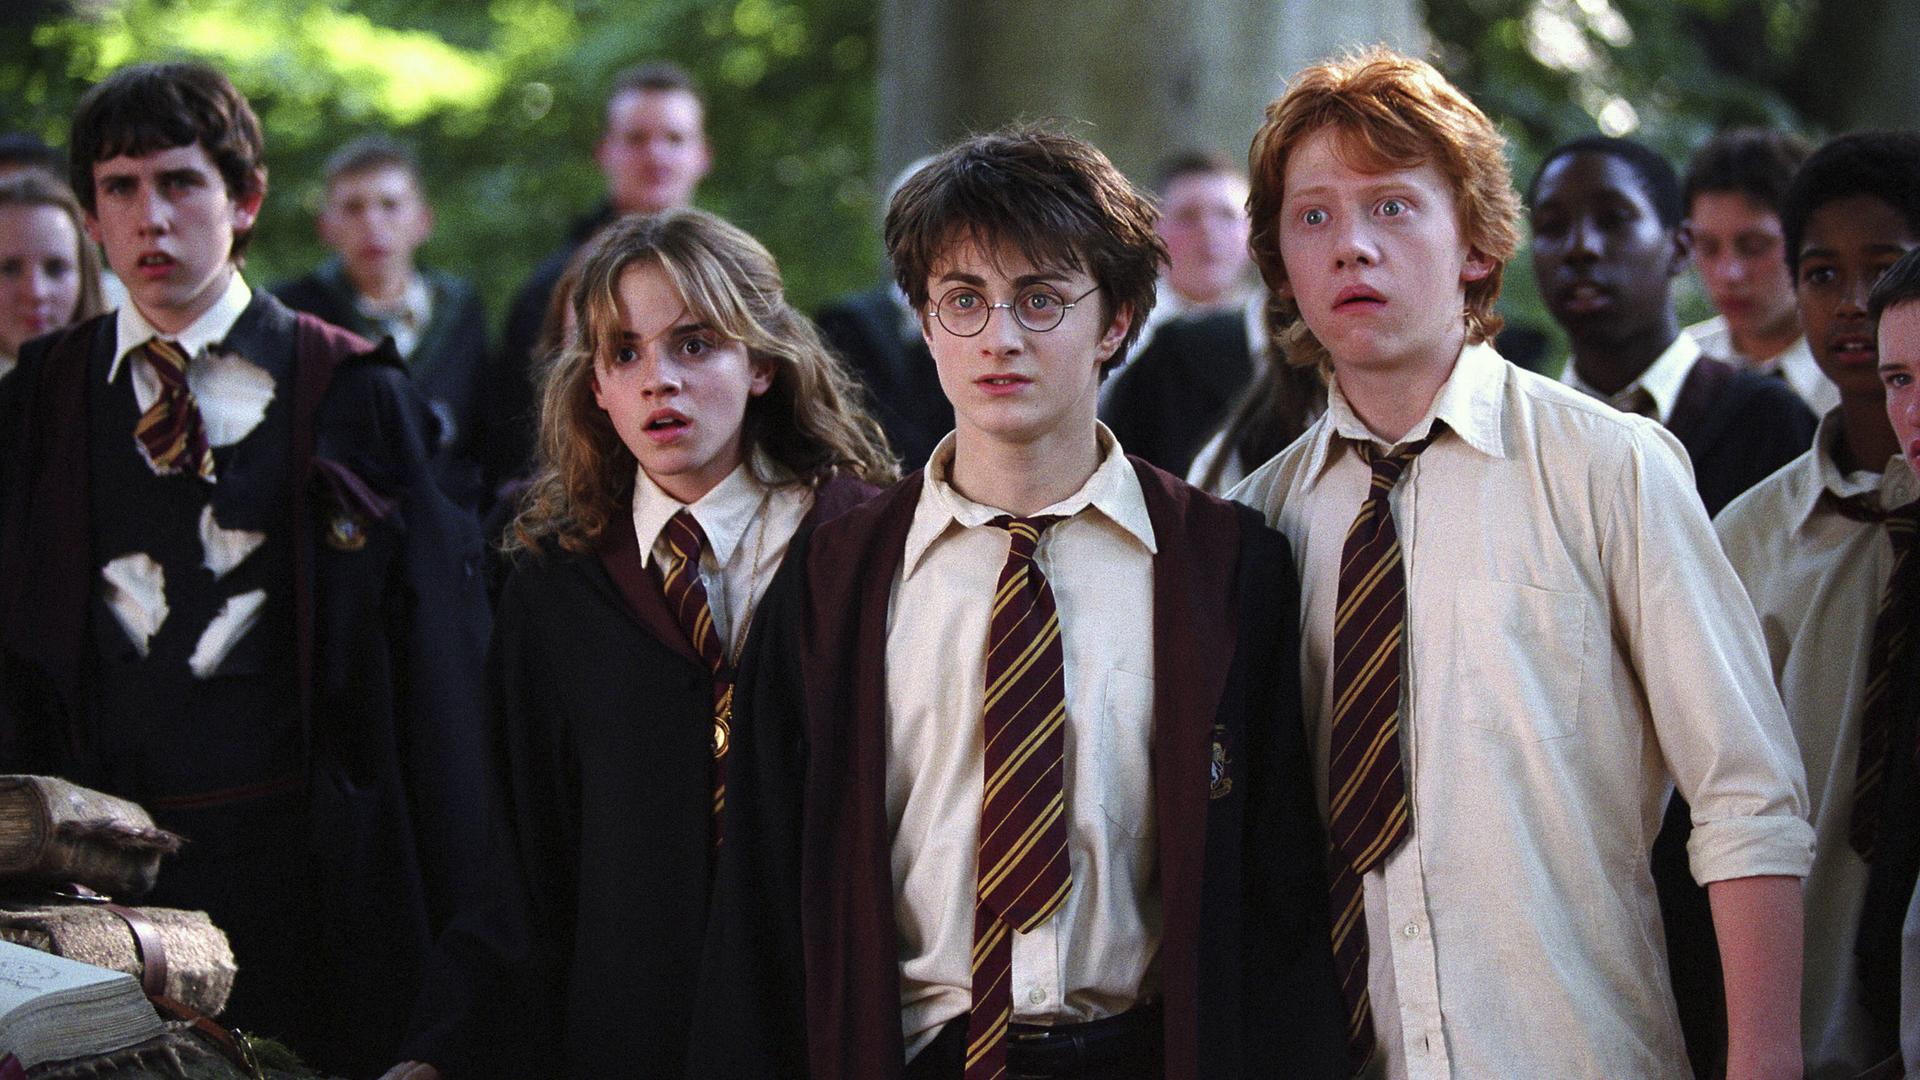 HARRY POTTER AND THE PRISONER OF AZKABAN BR / US 2004 L-R ALFRED ENOCH as Dean Thomas, EMMA WATSON as Hermione Granger,